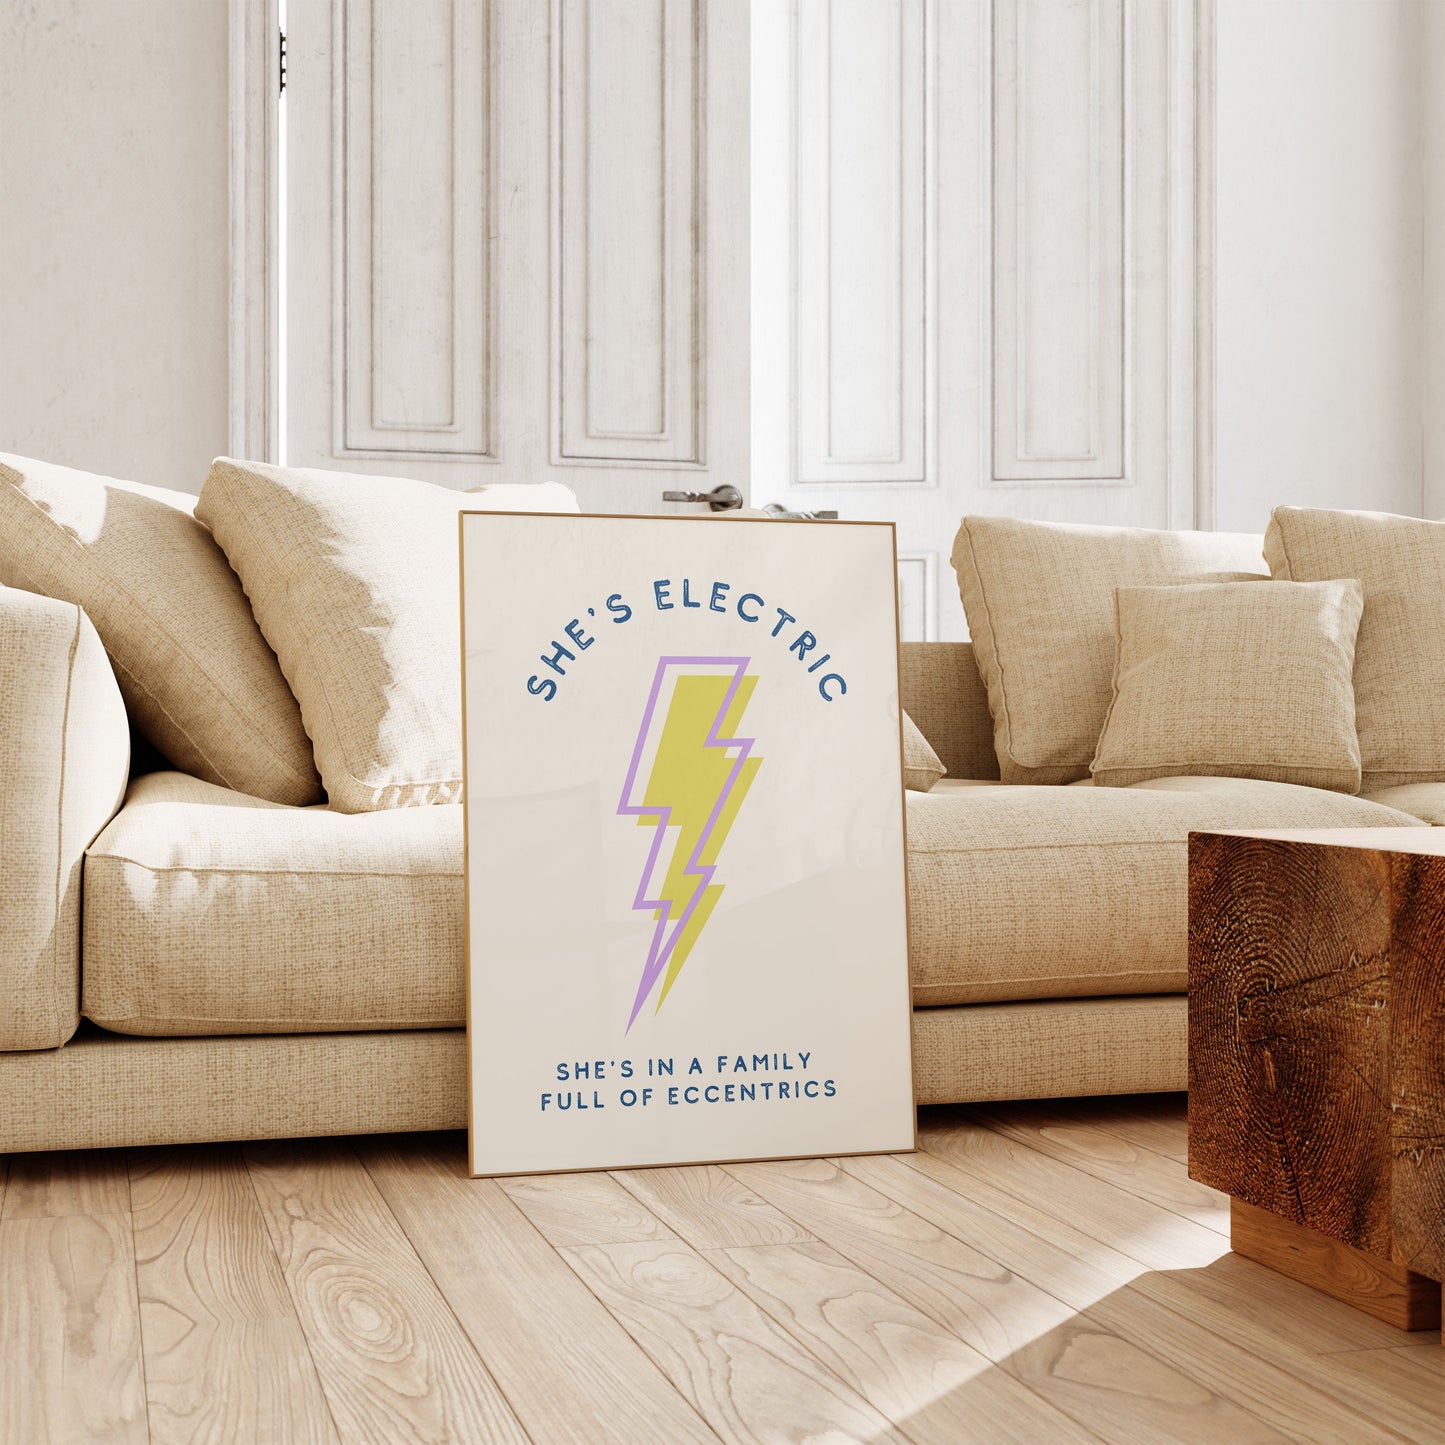 She's Electric Oasis Inspired Art Print, Oasis Wall Art, She's Electric, Music Print, Rock Music Art, Music Wall Art, Oasis, Music Lyrics,